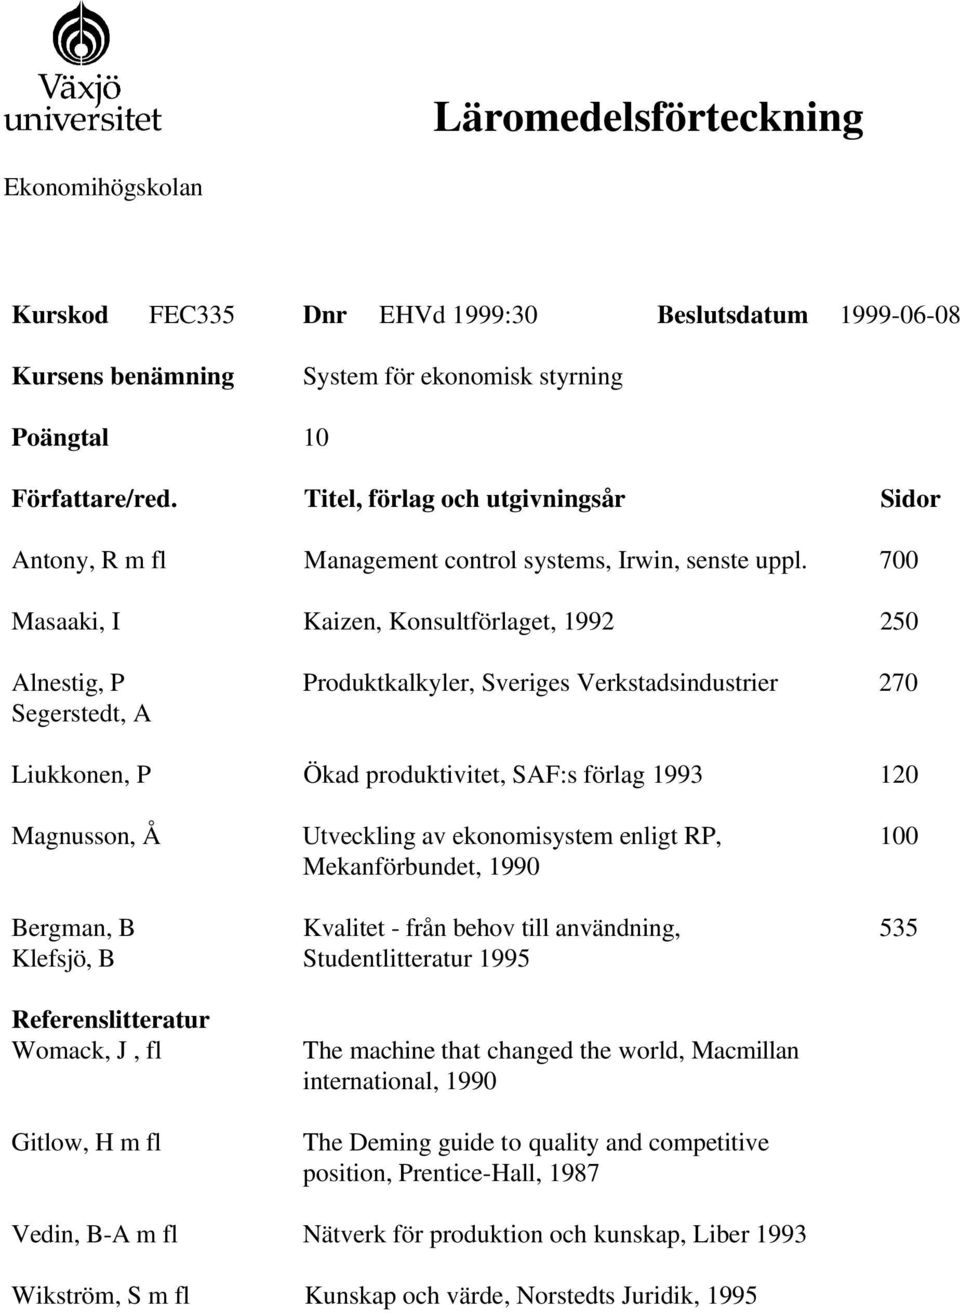 Mekanförbundet, 1990 Studentlitteratur 1995 The Deming guide to quality and